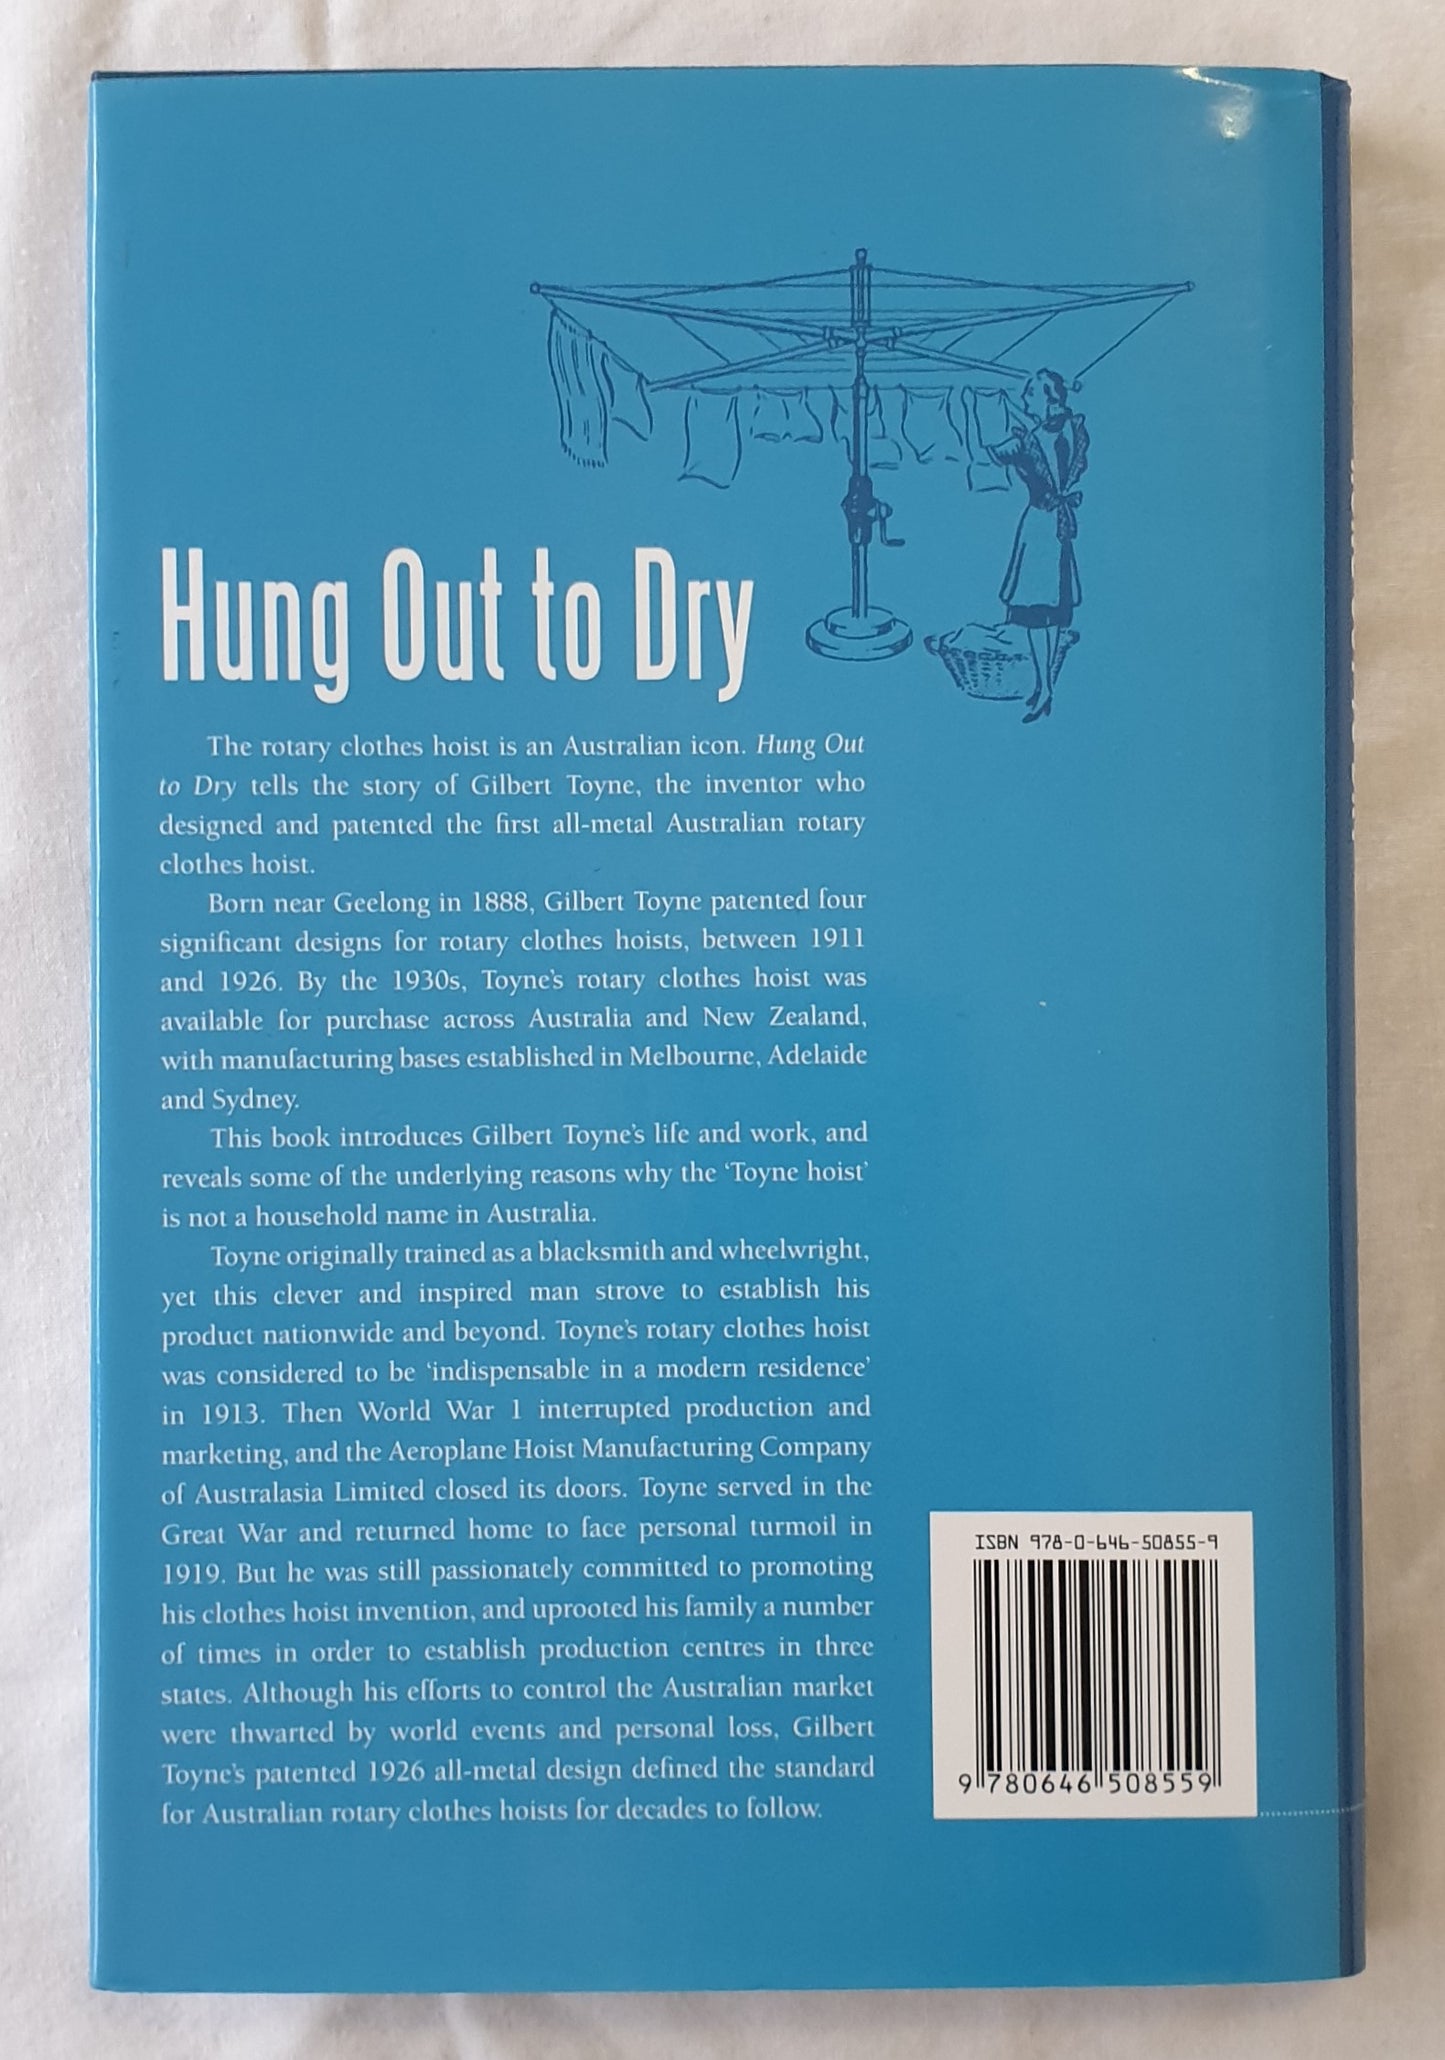 Hung Out To Dry by Peter Cuffley and Cas Middlemis